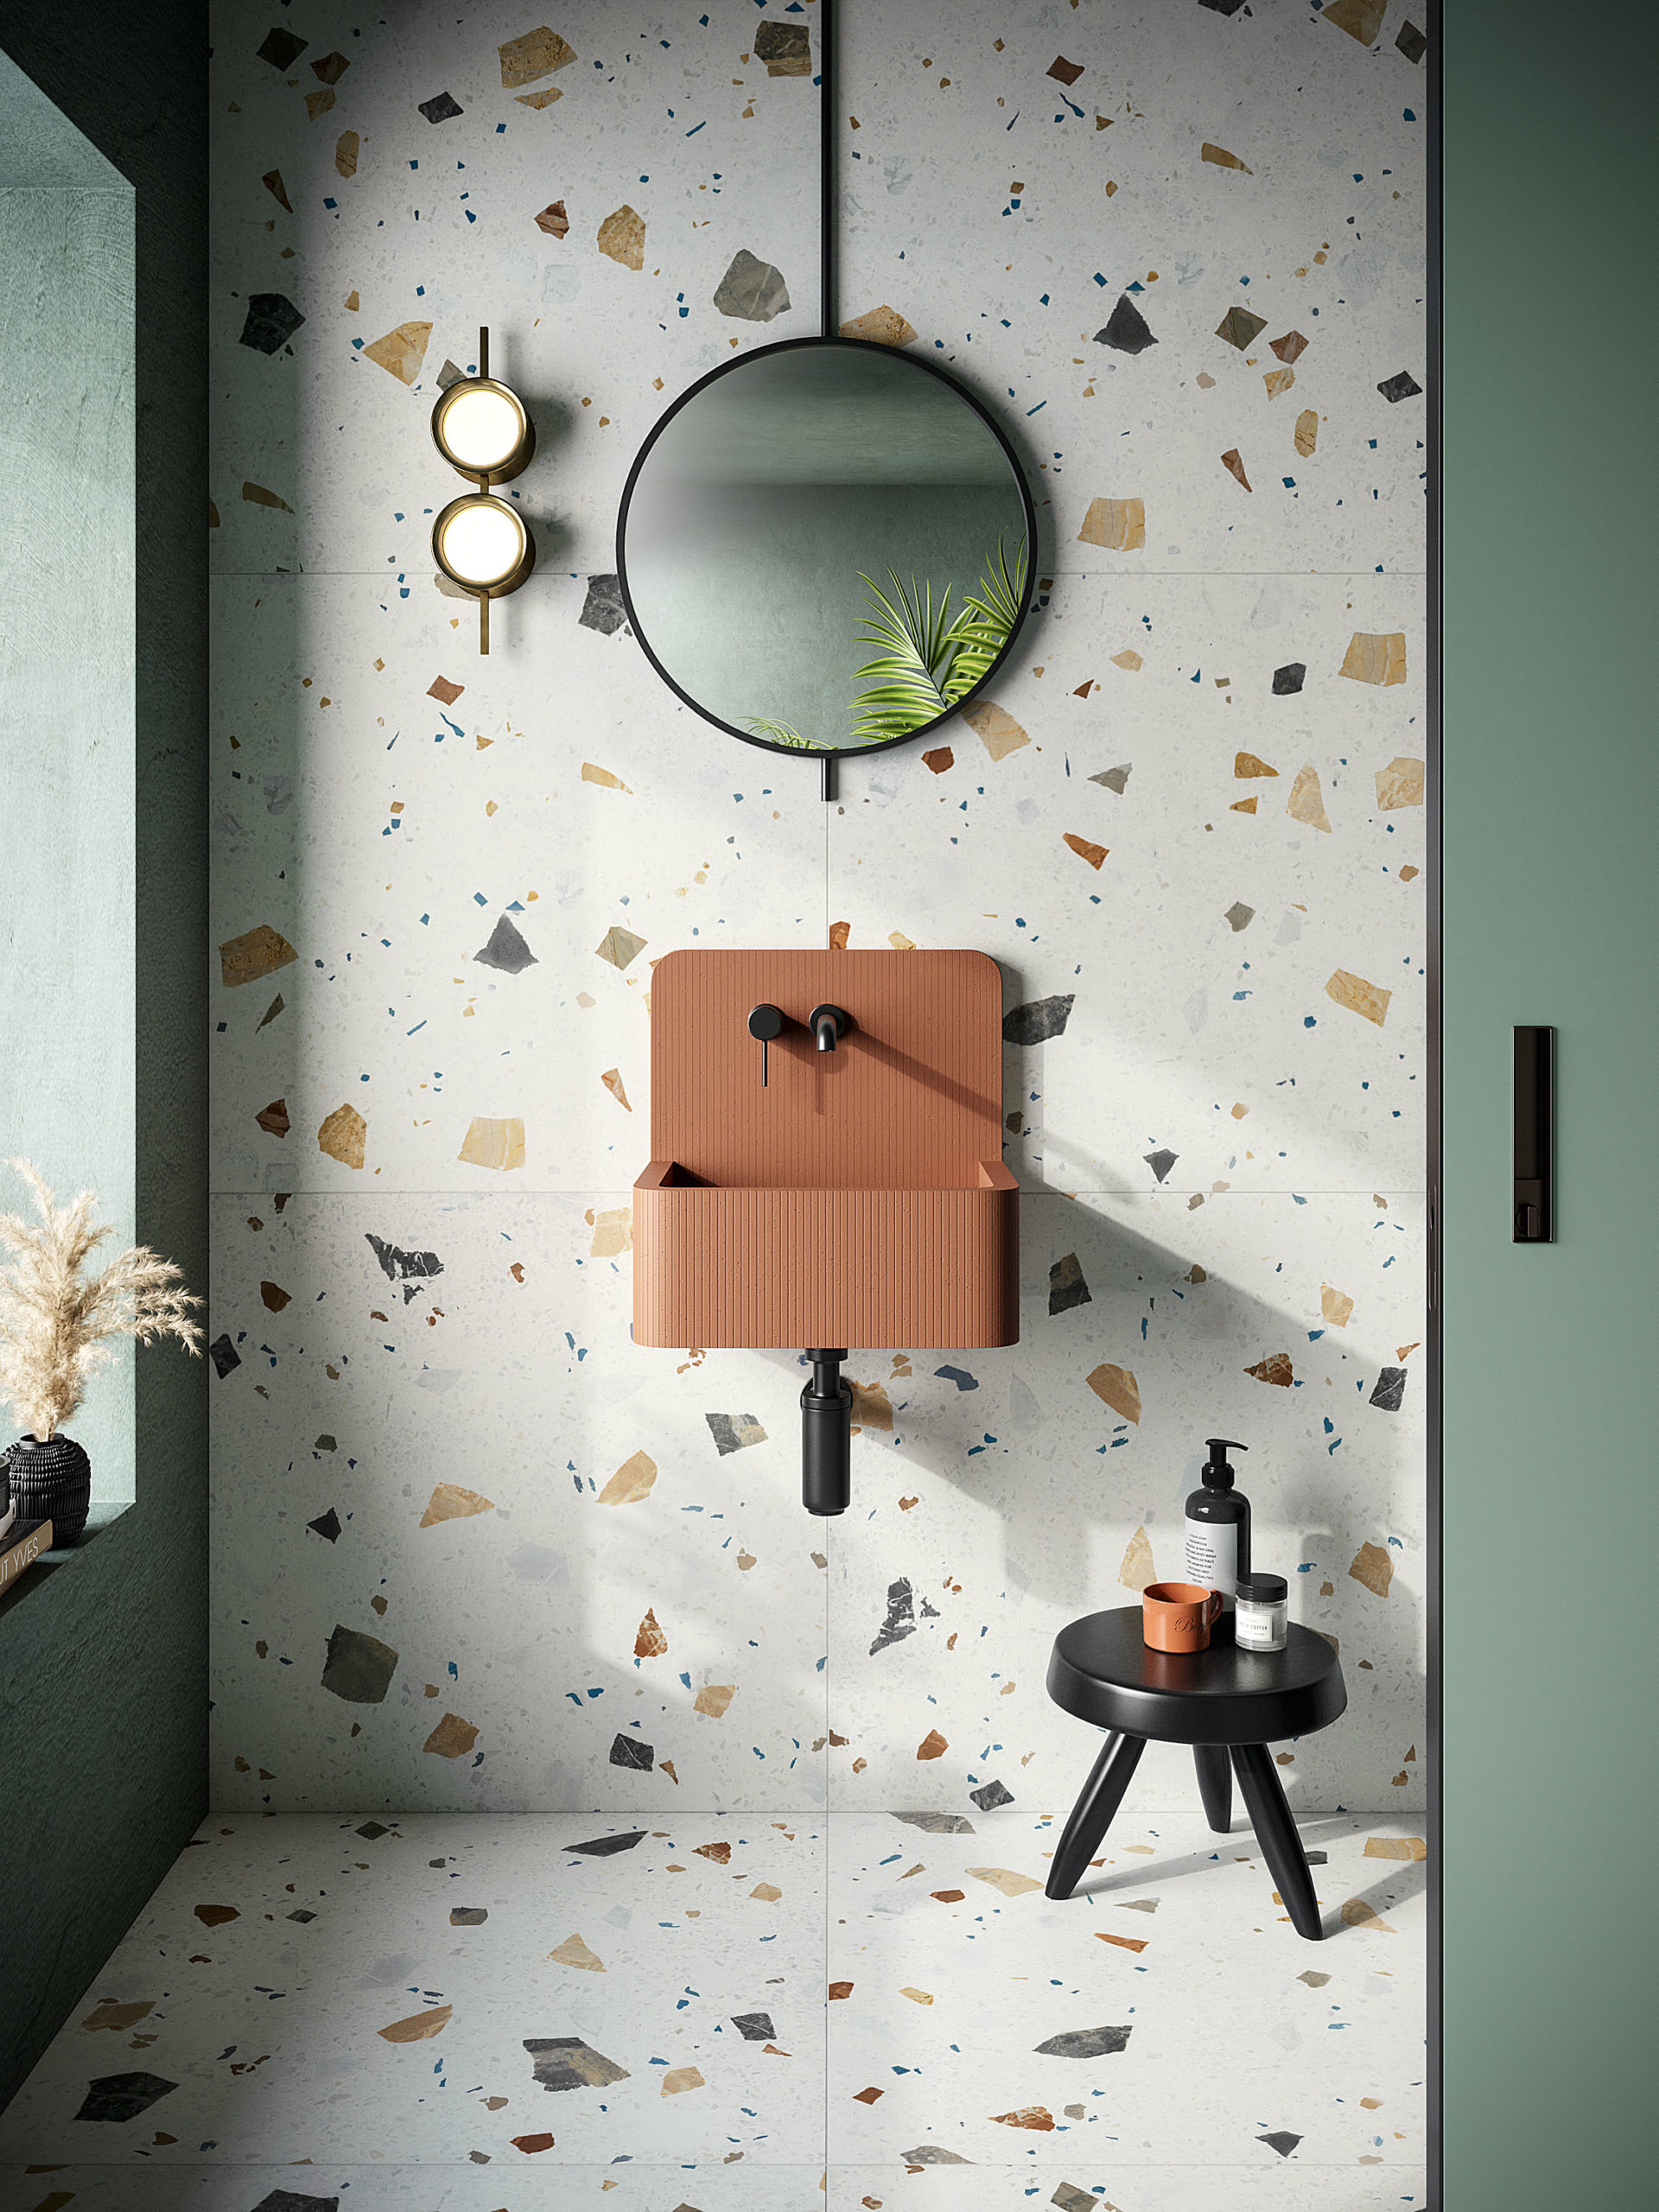 Tile Trends 2021 From Art Deco To New, Latest Bathroom Tiles Design 2021 Indiana